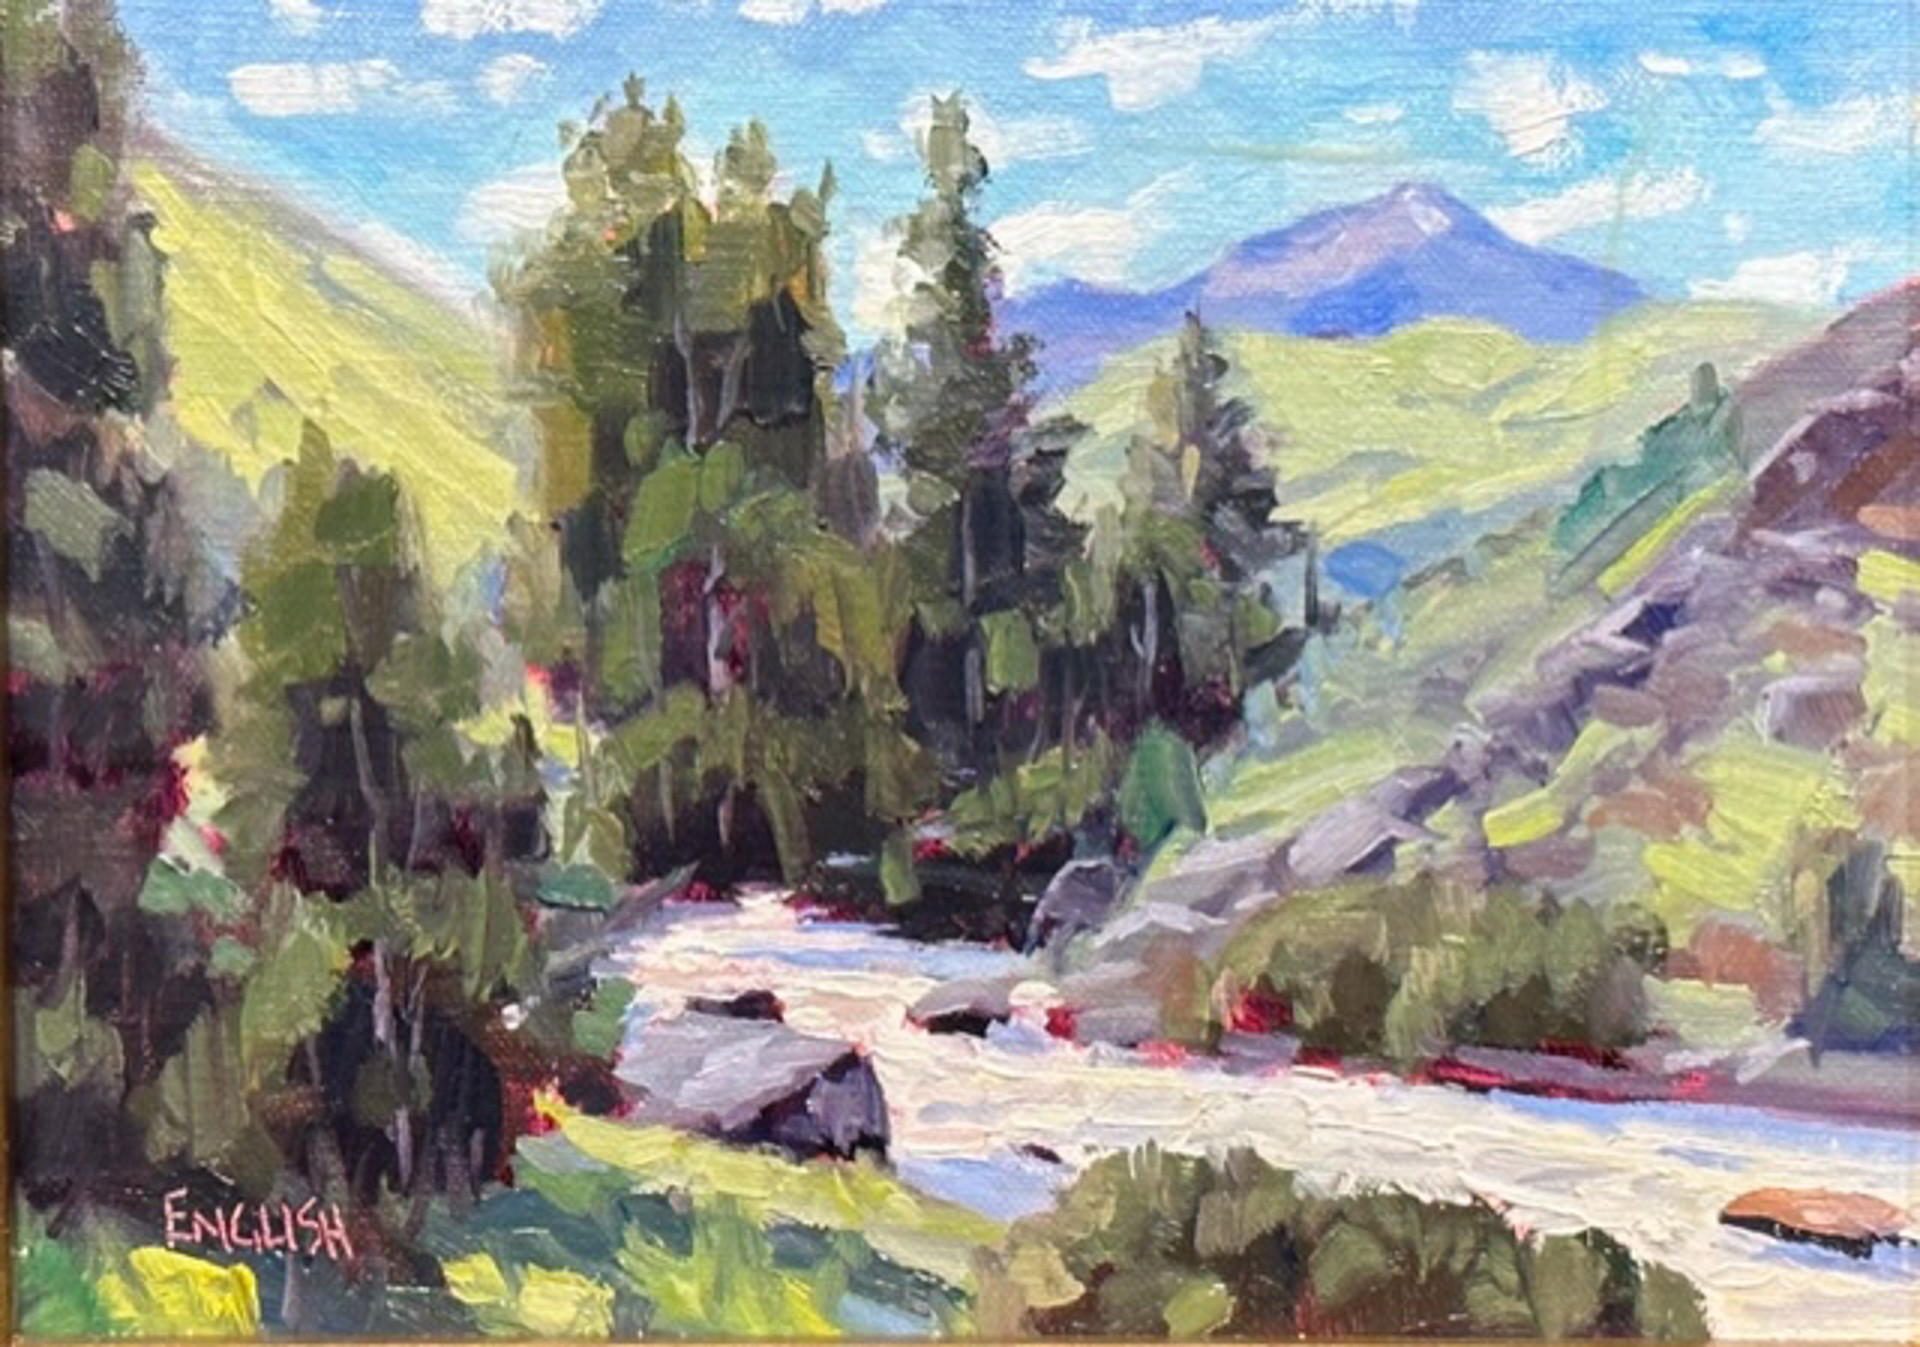 Above the Creek by Thomas English